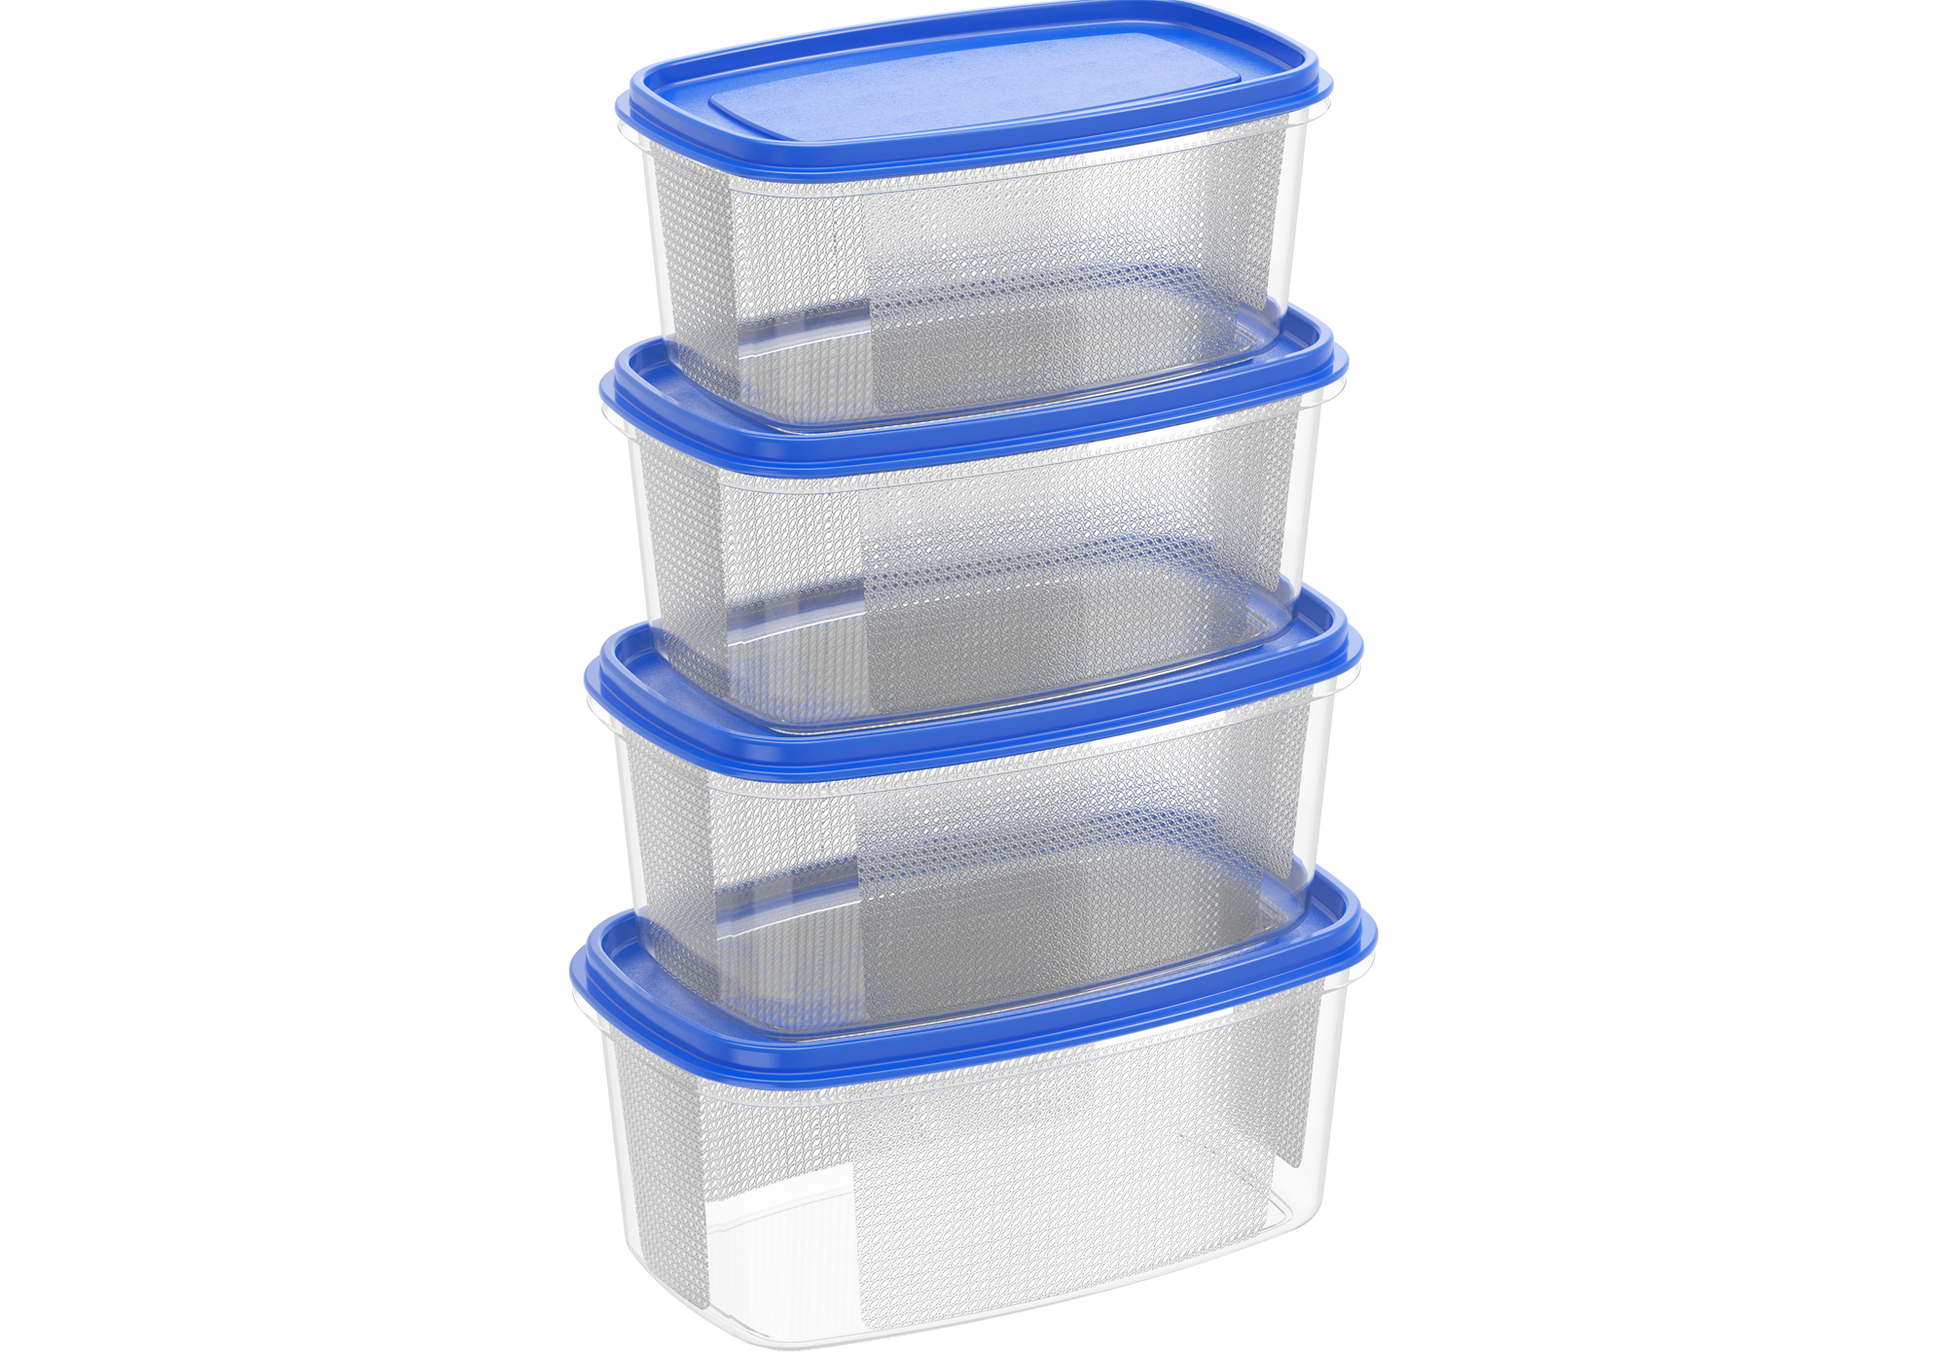 Oval Food Storage Containers Pack - Cosmoplast Bahrain